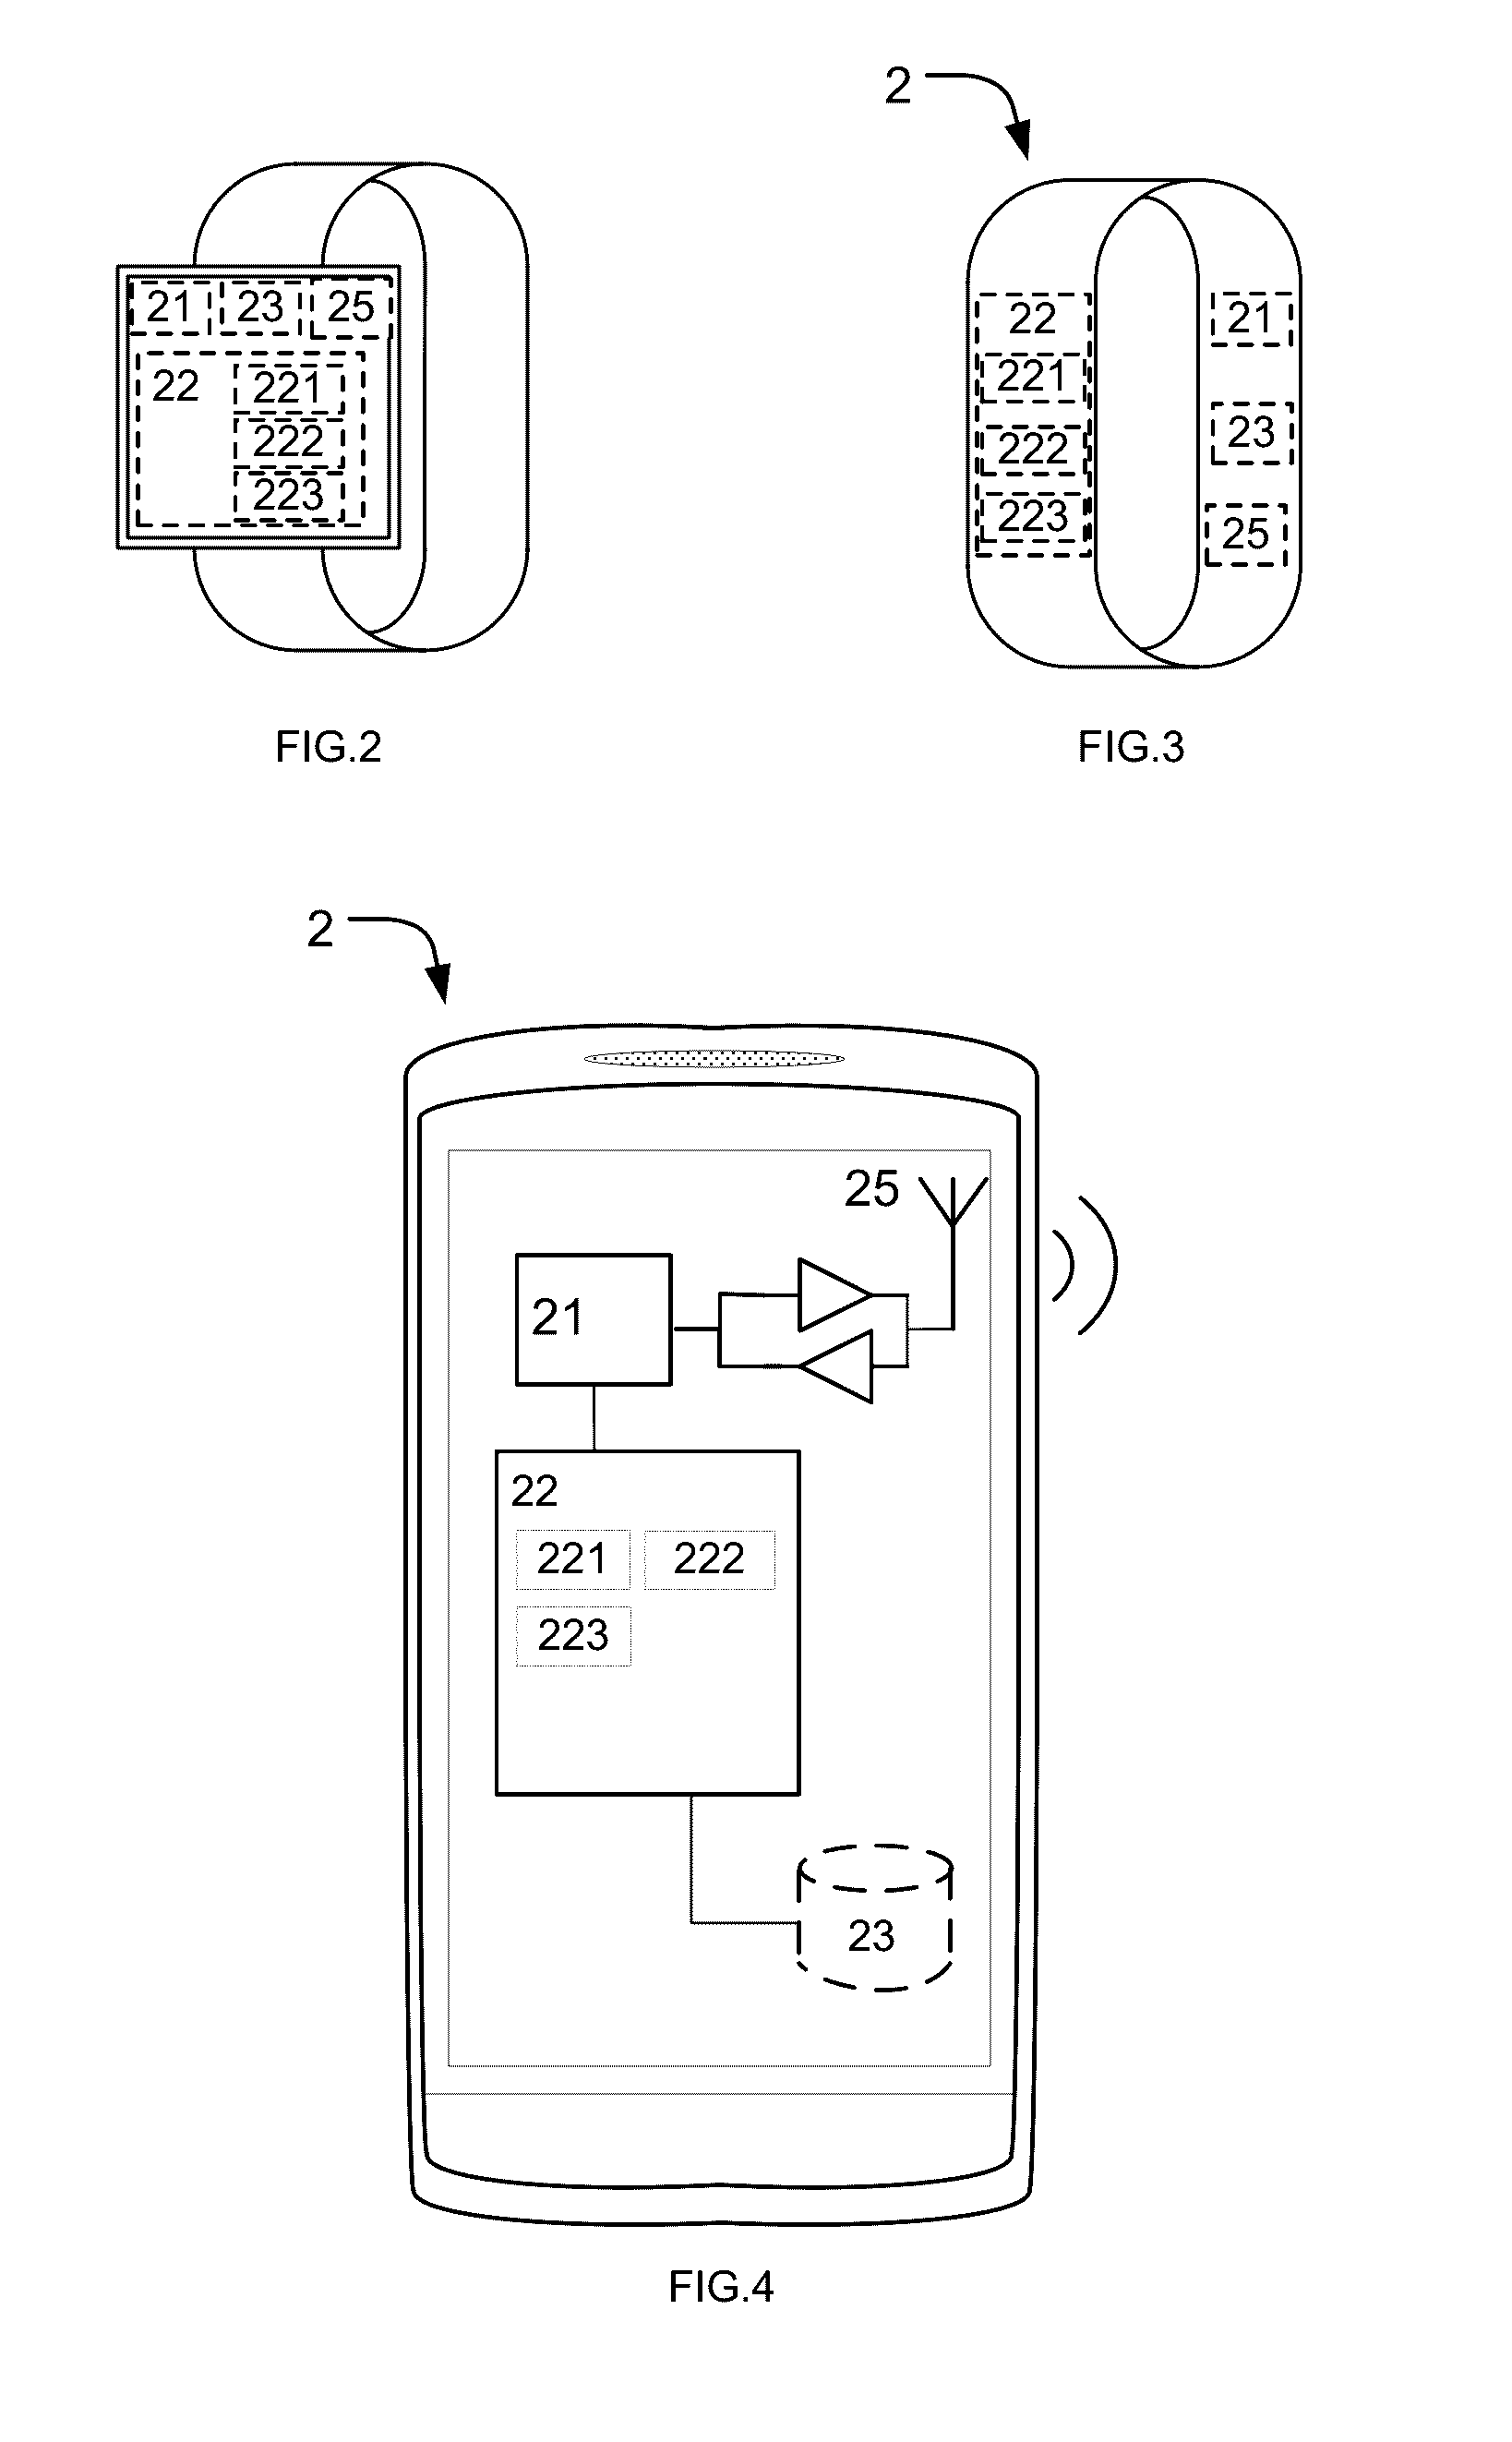 System, method and device for transferring information via body coupled communication from a touch sensitive interface